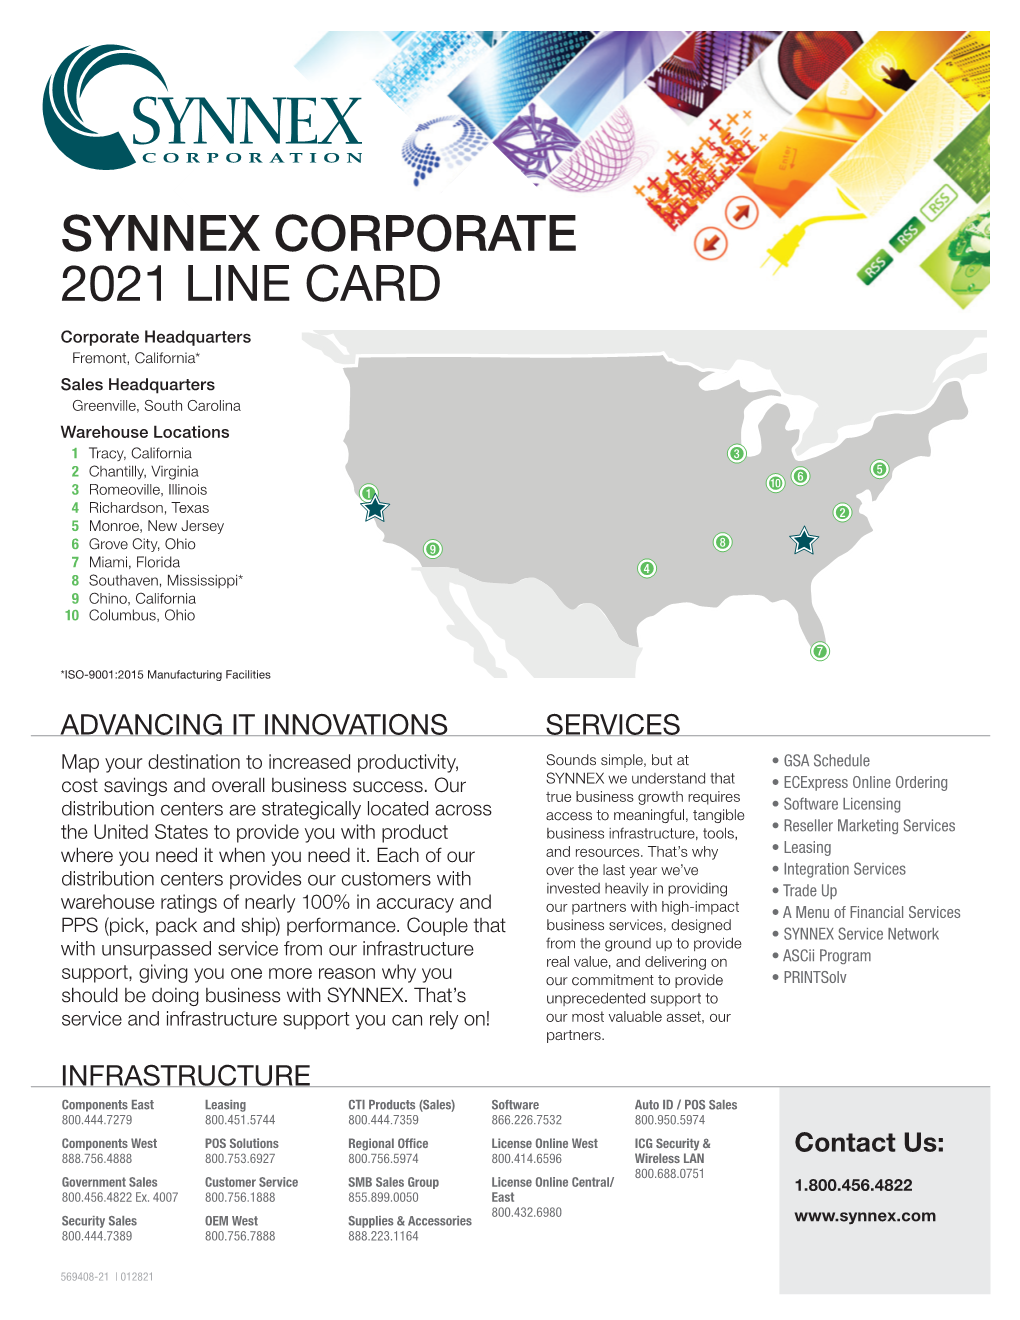 Synnex Corporate 2021 Line Card